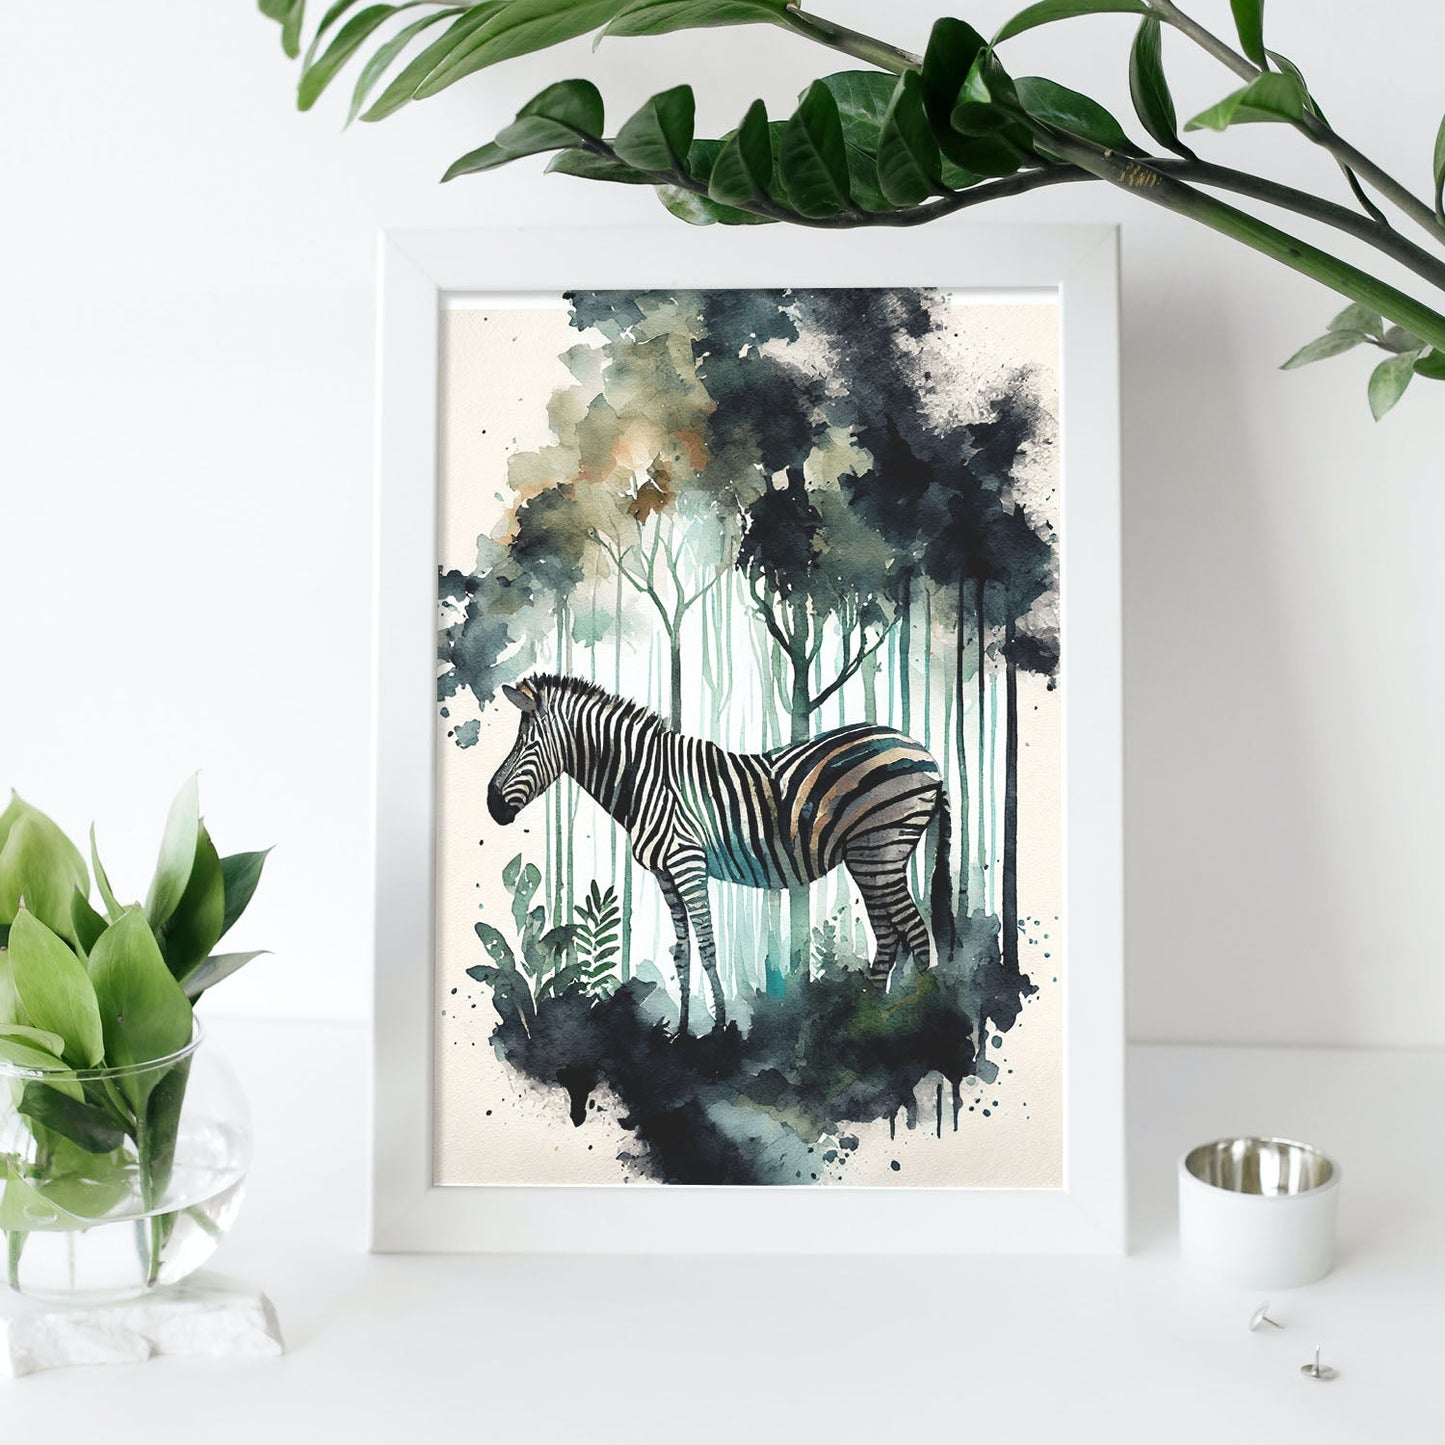 Nacnic Watercolor of Zebra in the forest. Aesthetic Wall Art Prints for Bedroom or Living Room Design.